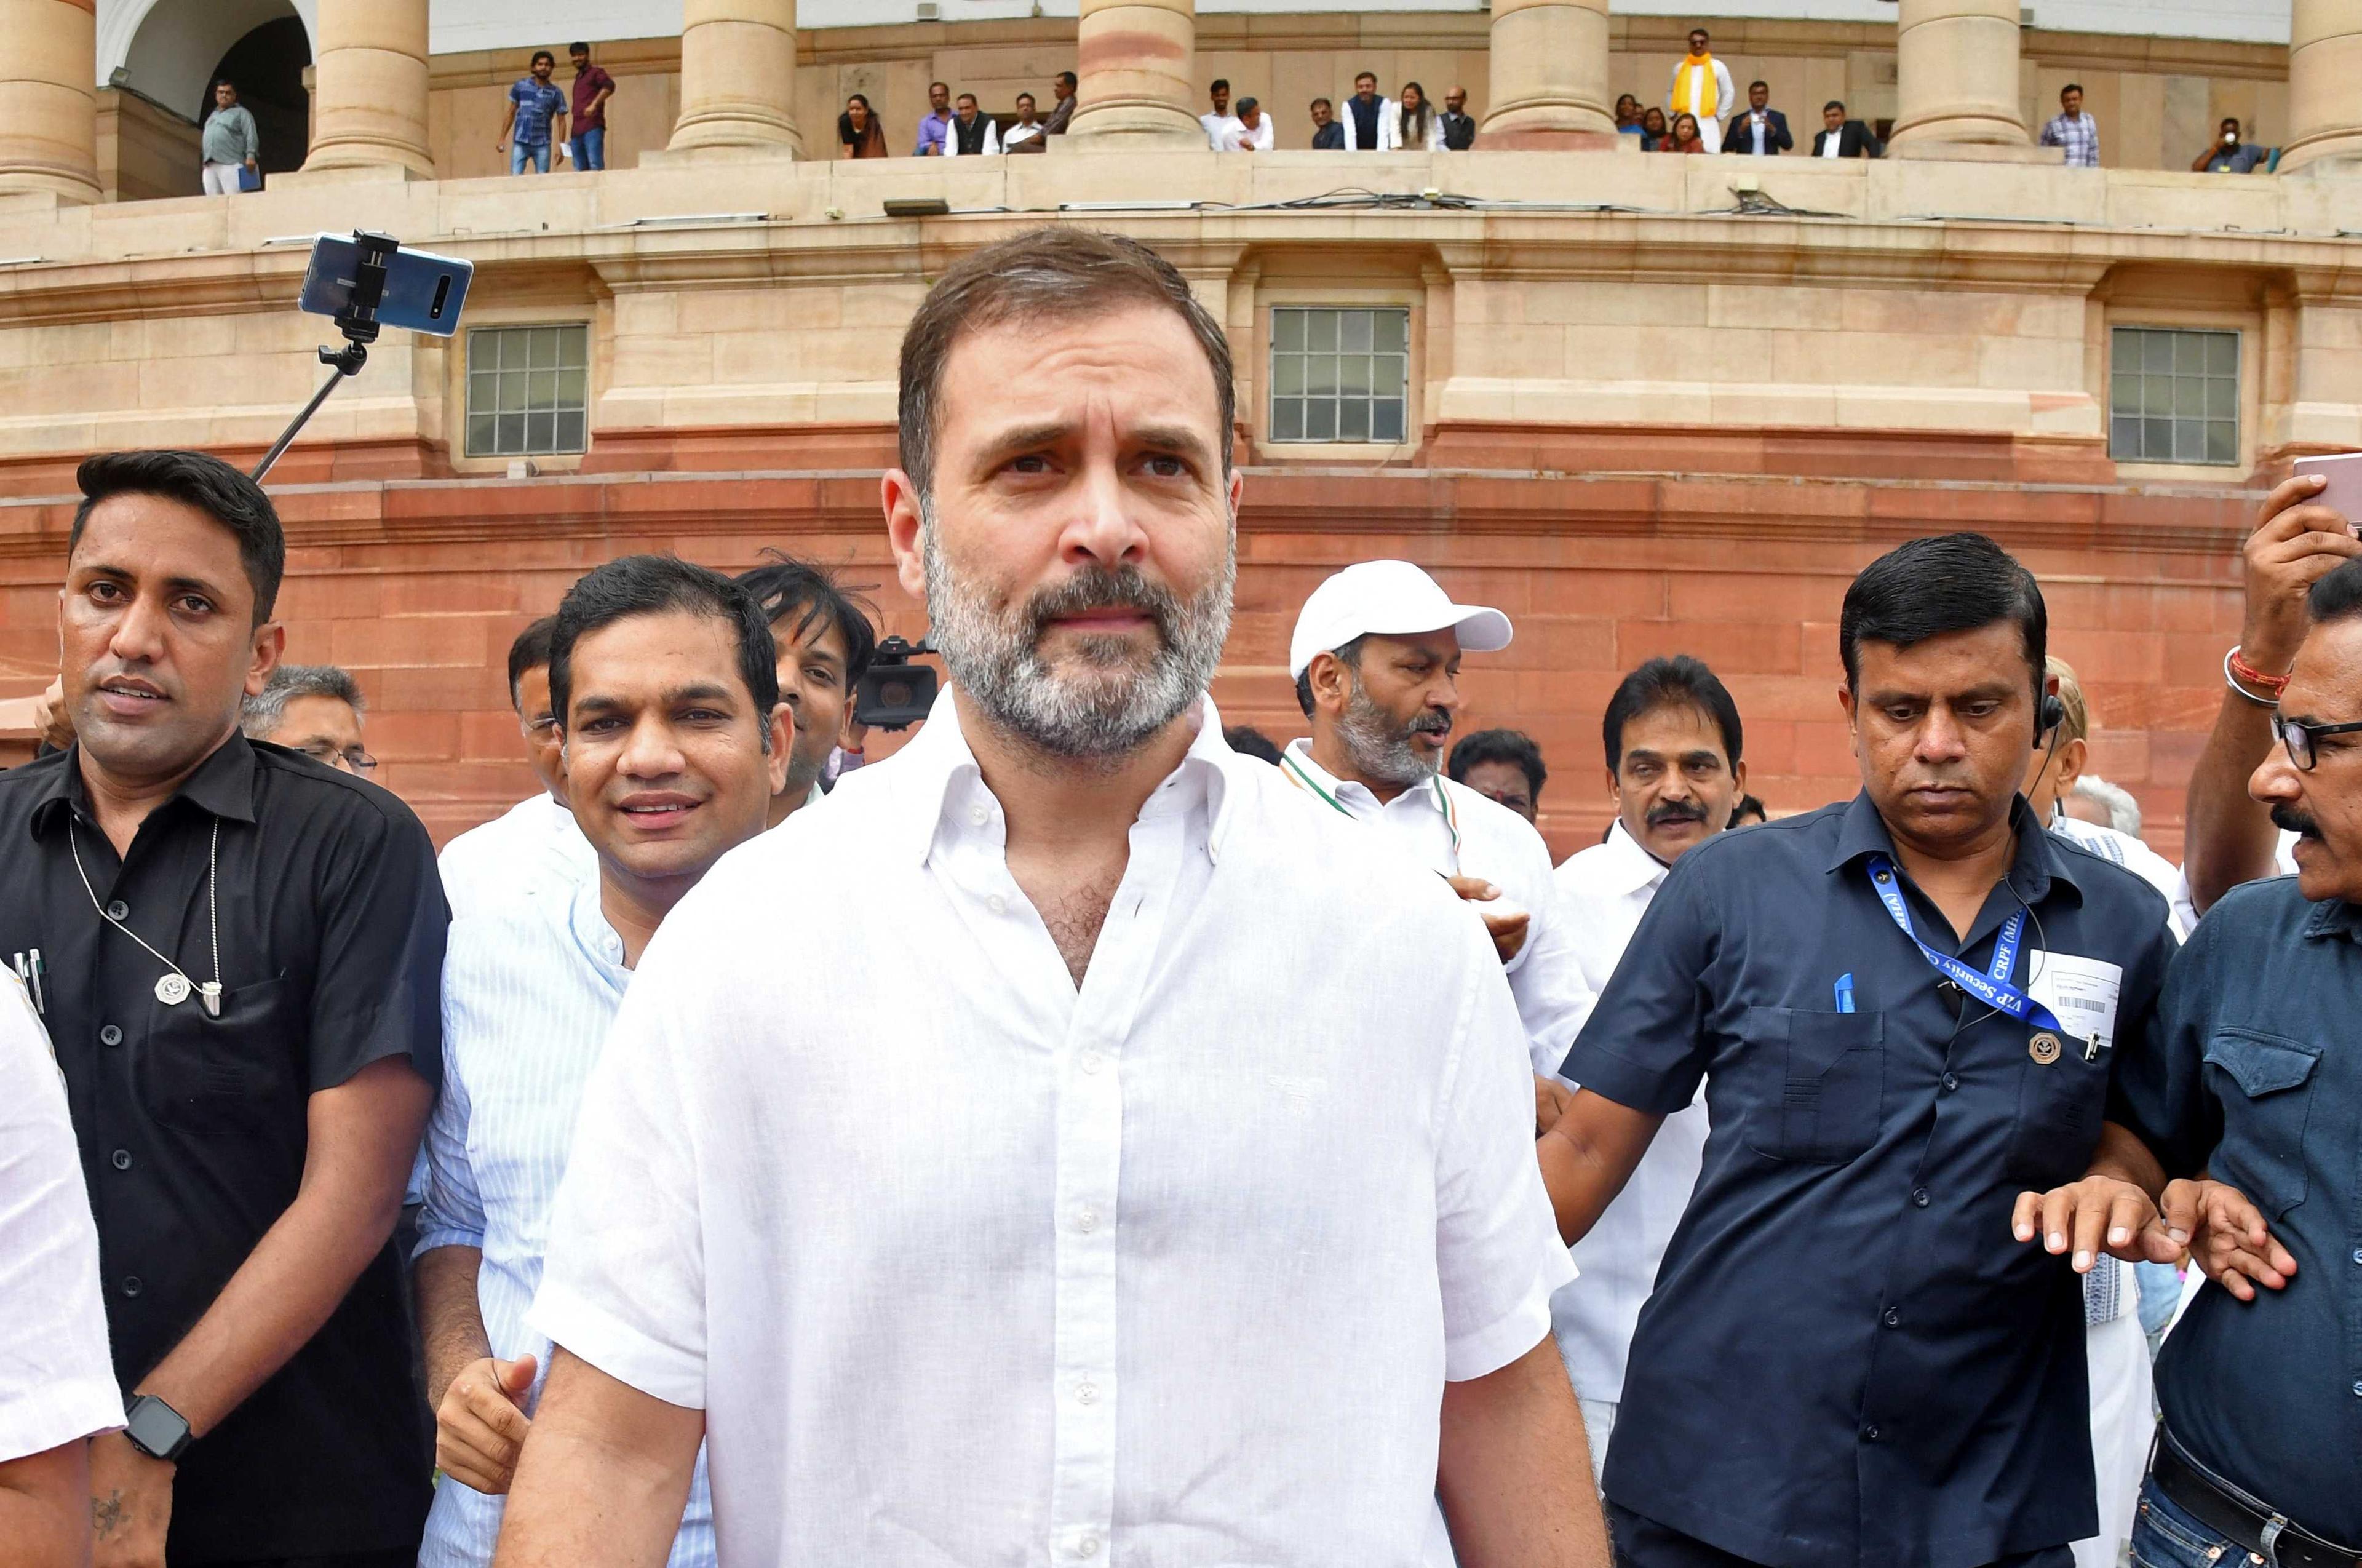 Rahul Gandhi, a senior leader of India's main opposition Congress party, arrives at the parliament after he was reinstated as a lawmaker, in New Delhi, India, Aug 7. Photo: Reuters